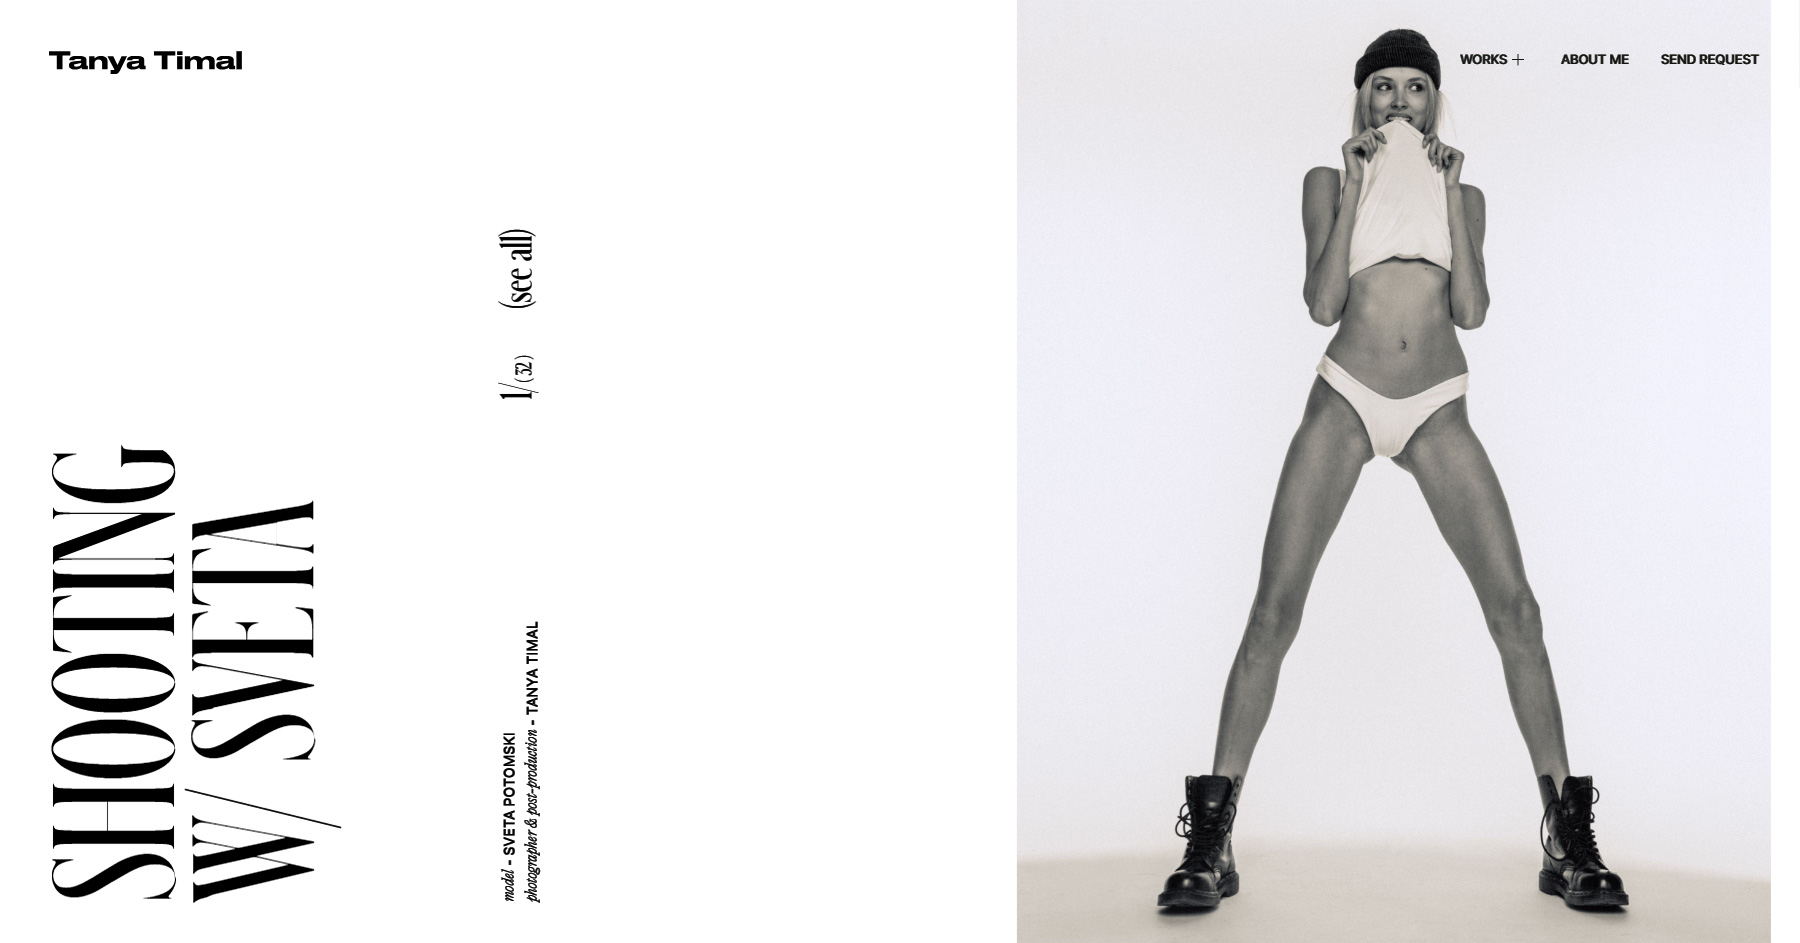 Tanya Timal Photographer - Website of the Day